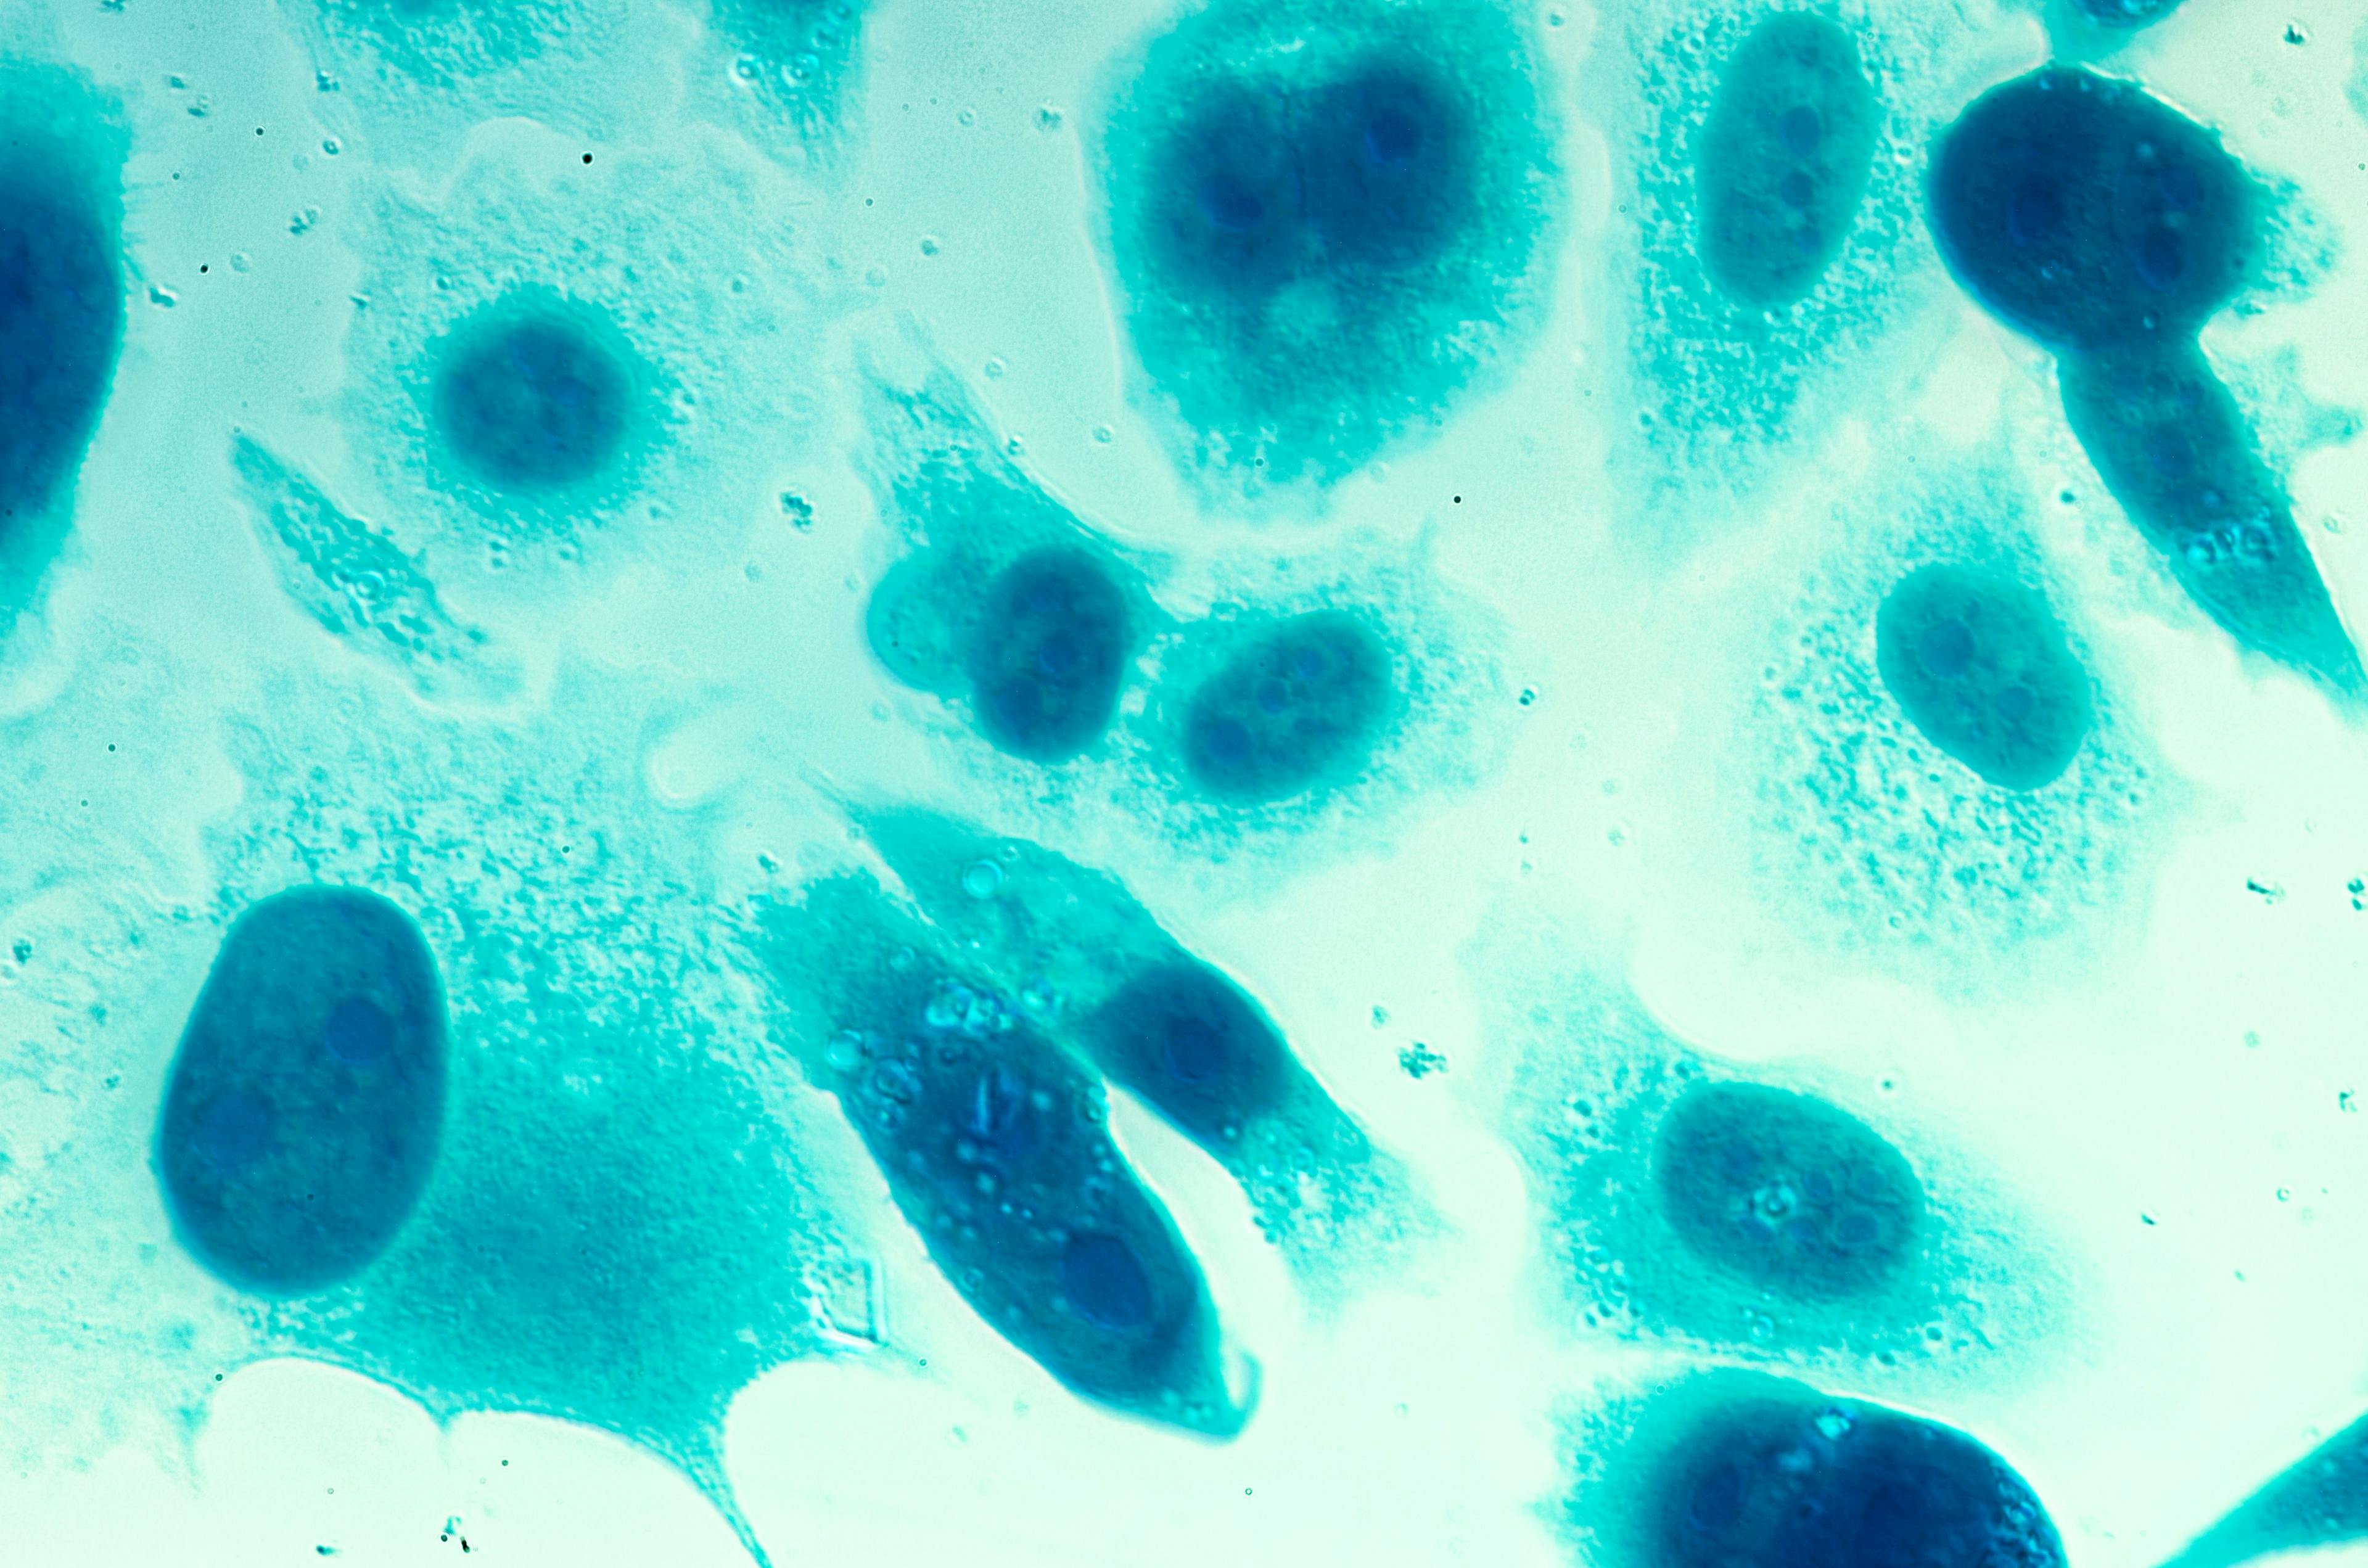 PC-3 human prostate cancer cells| Image Credit: © heitipaves - www.stock.adobe.com